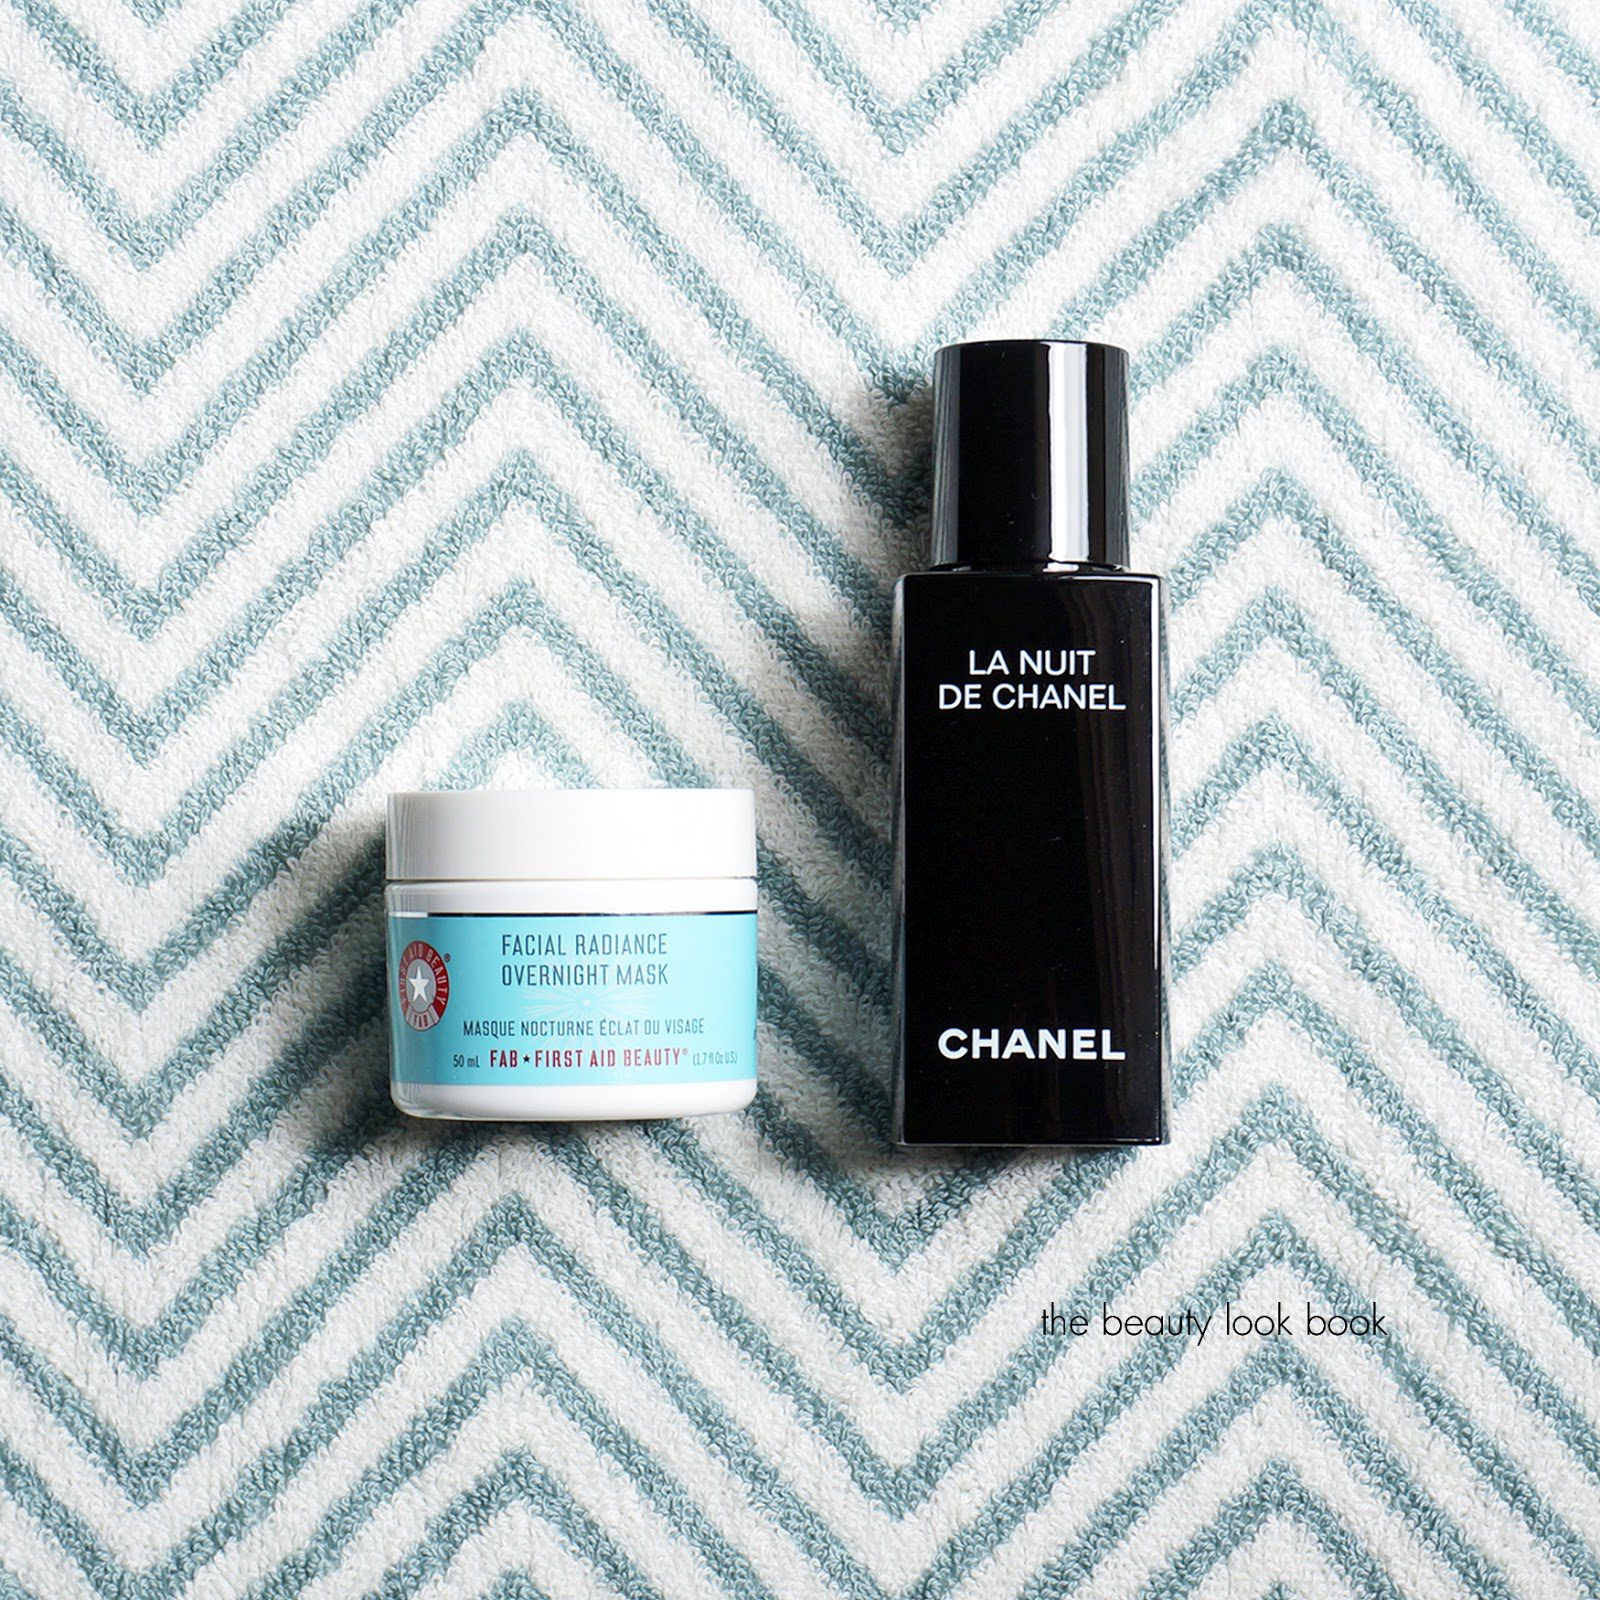 Night Time Treatments: First Aid Beauty Facial Radiance Overnight Mask and  La Nuit de Chanel - The Beauty Look Book